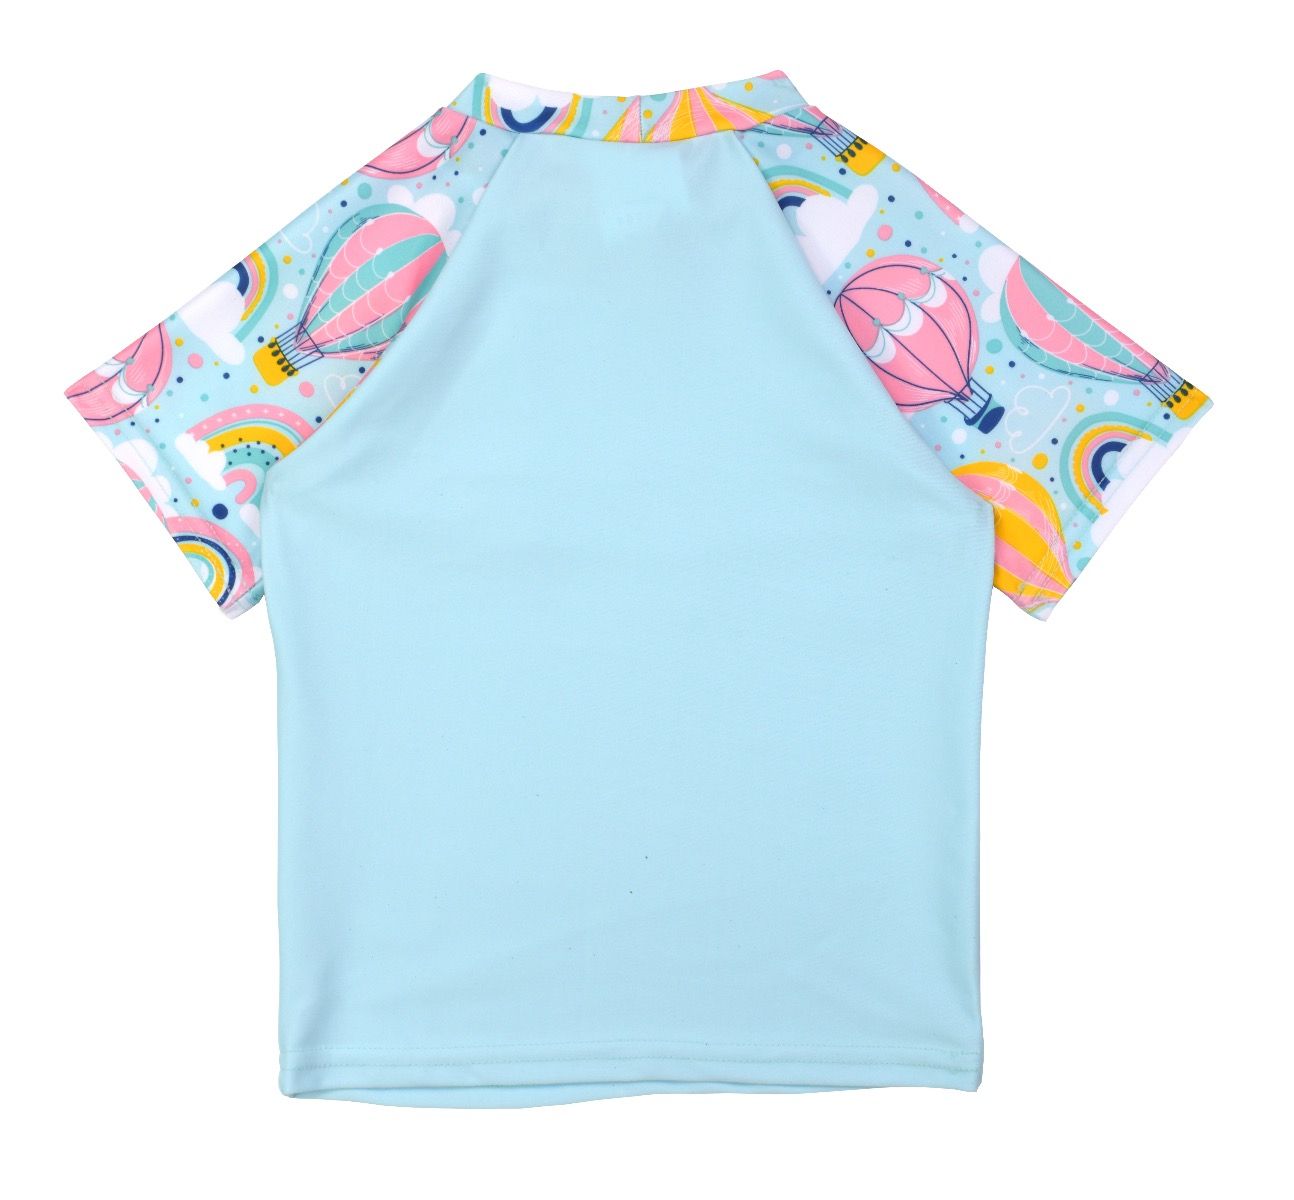 UV protective short sleeve rash top in light blue, and hot air balloons, rainbows and clouds print on sleeves. Back.